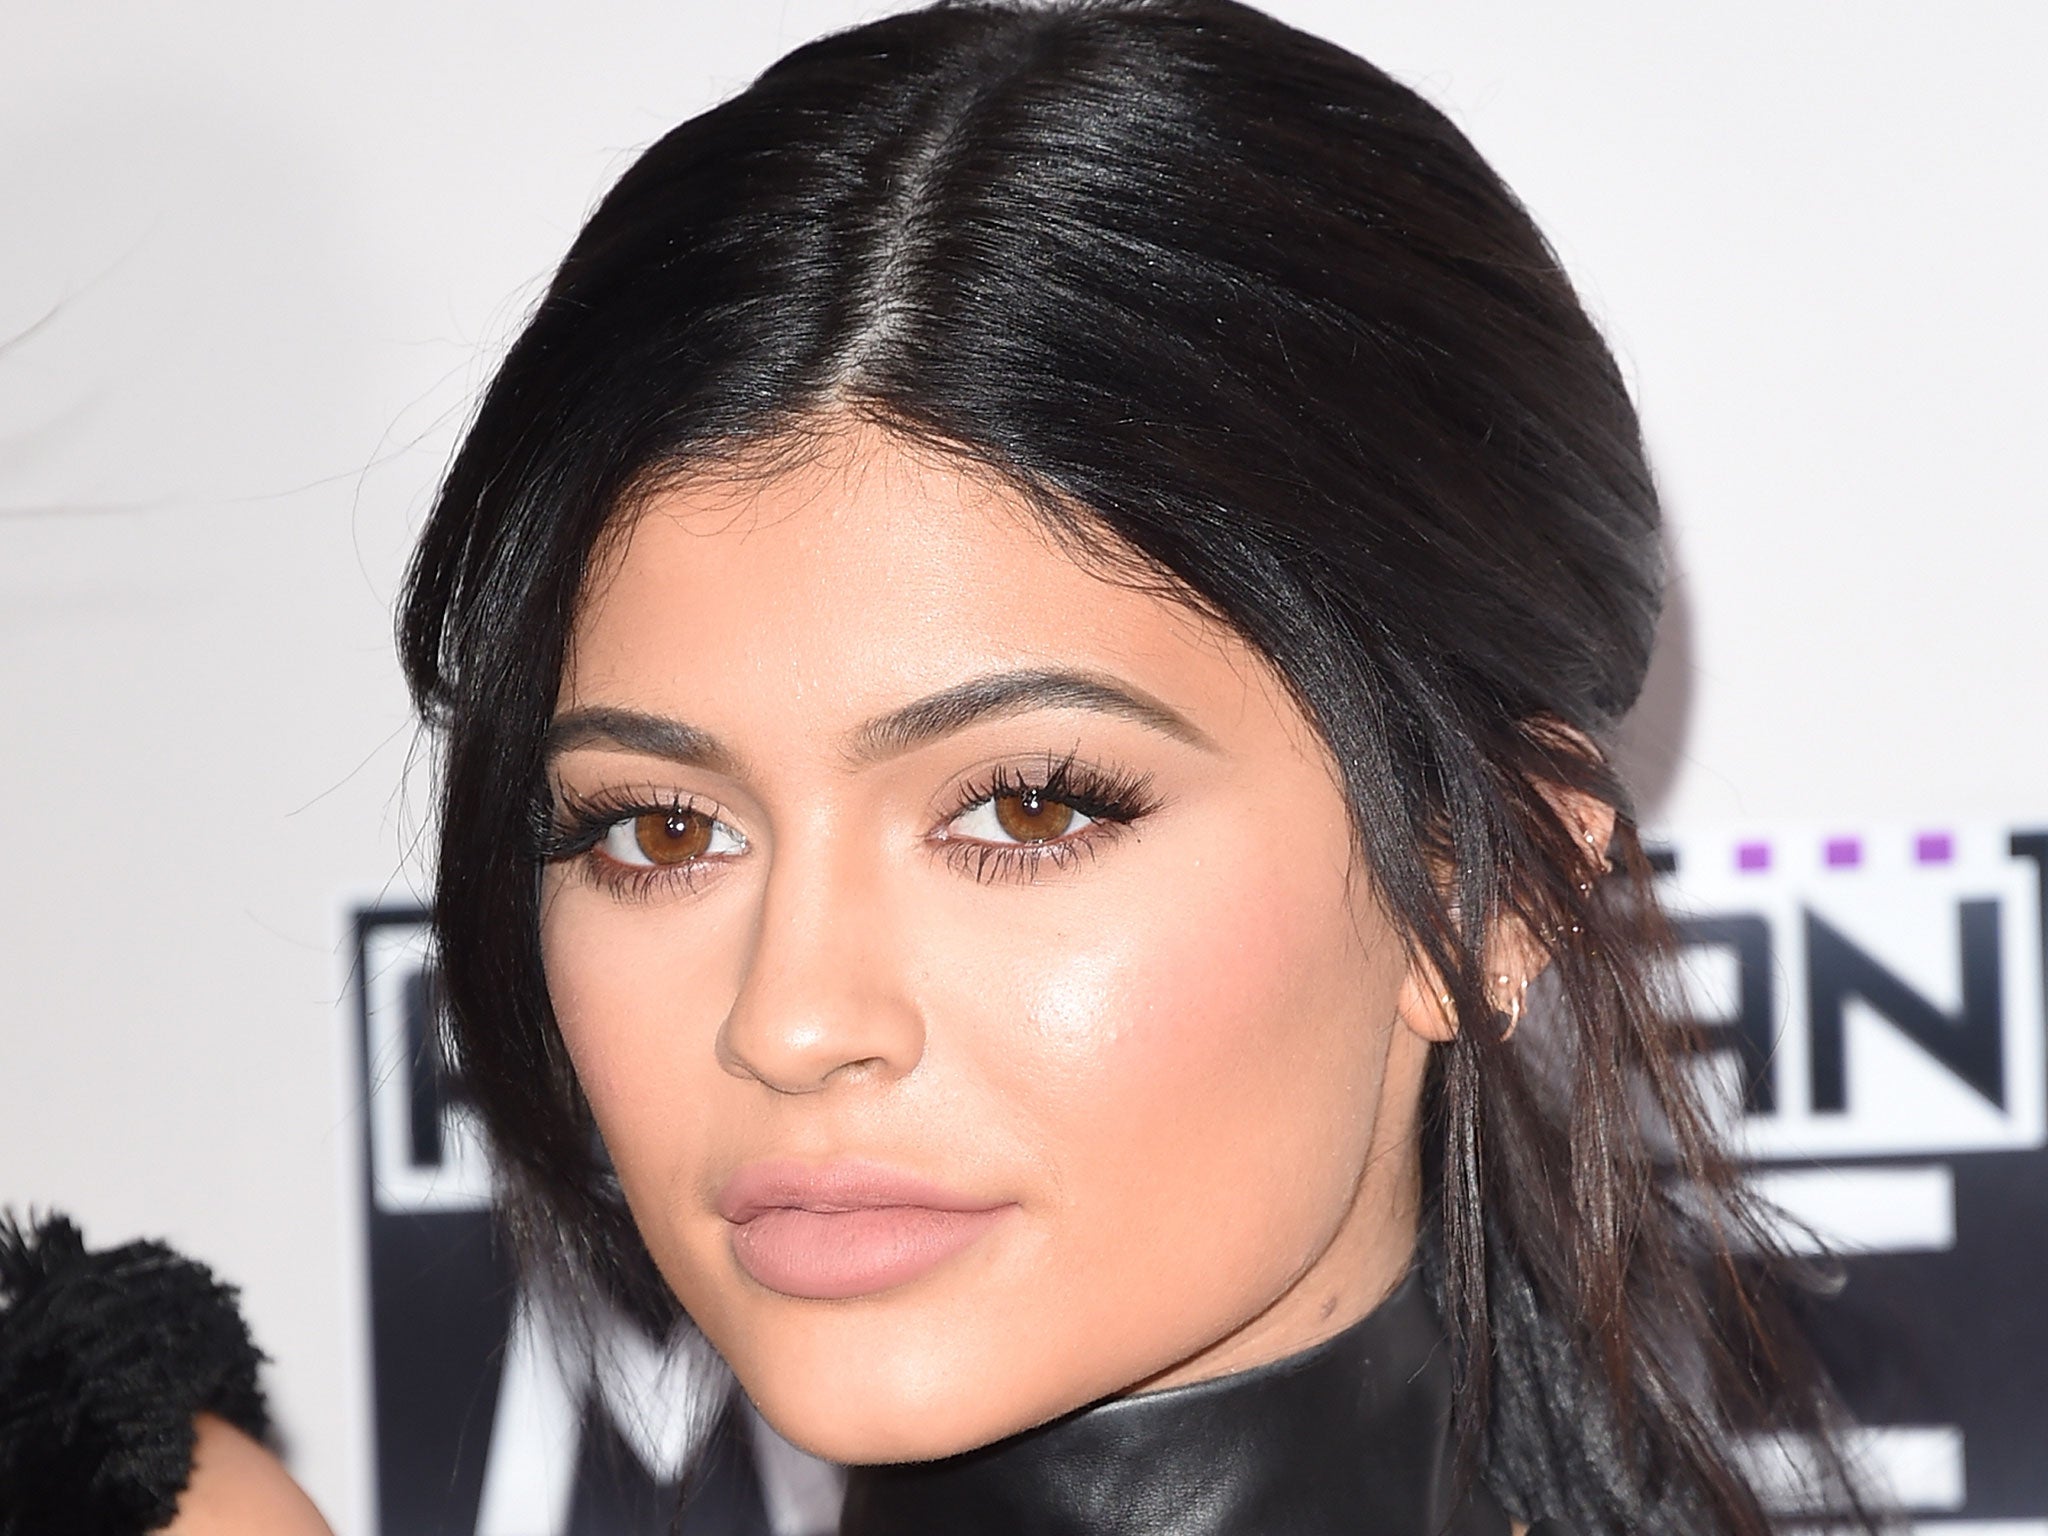 Kylie Jenner has caused controversy by posing in a wheelchair